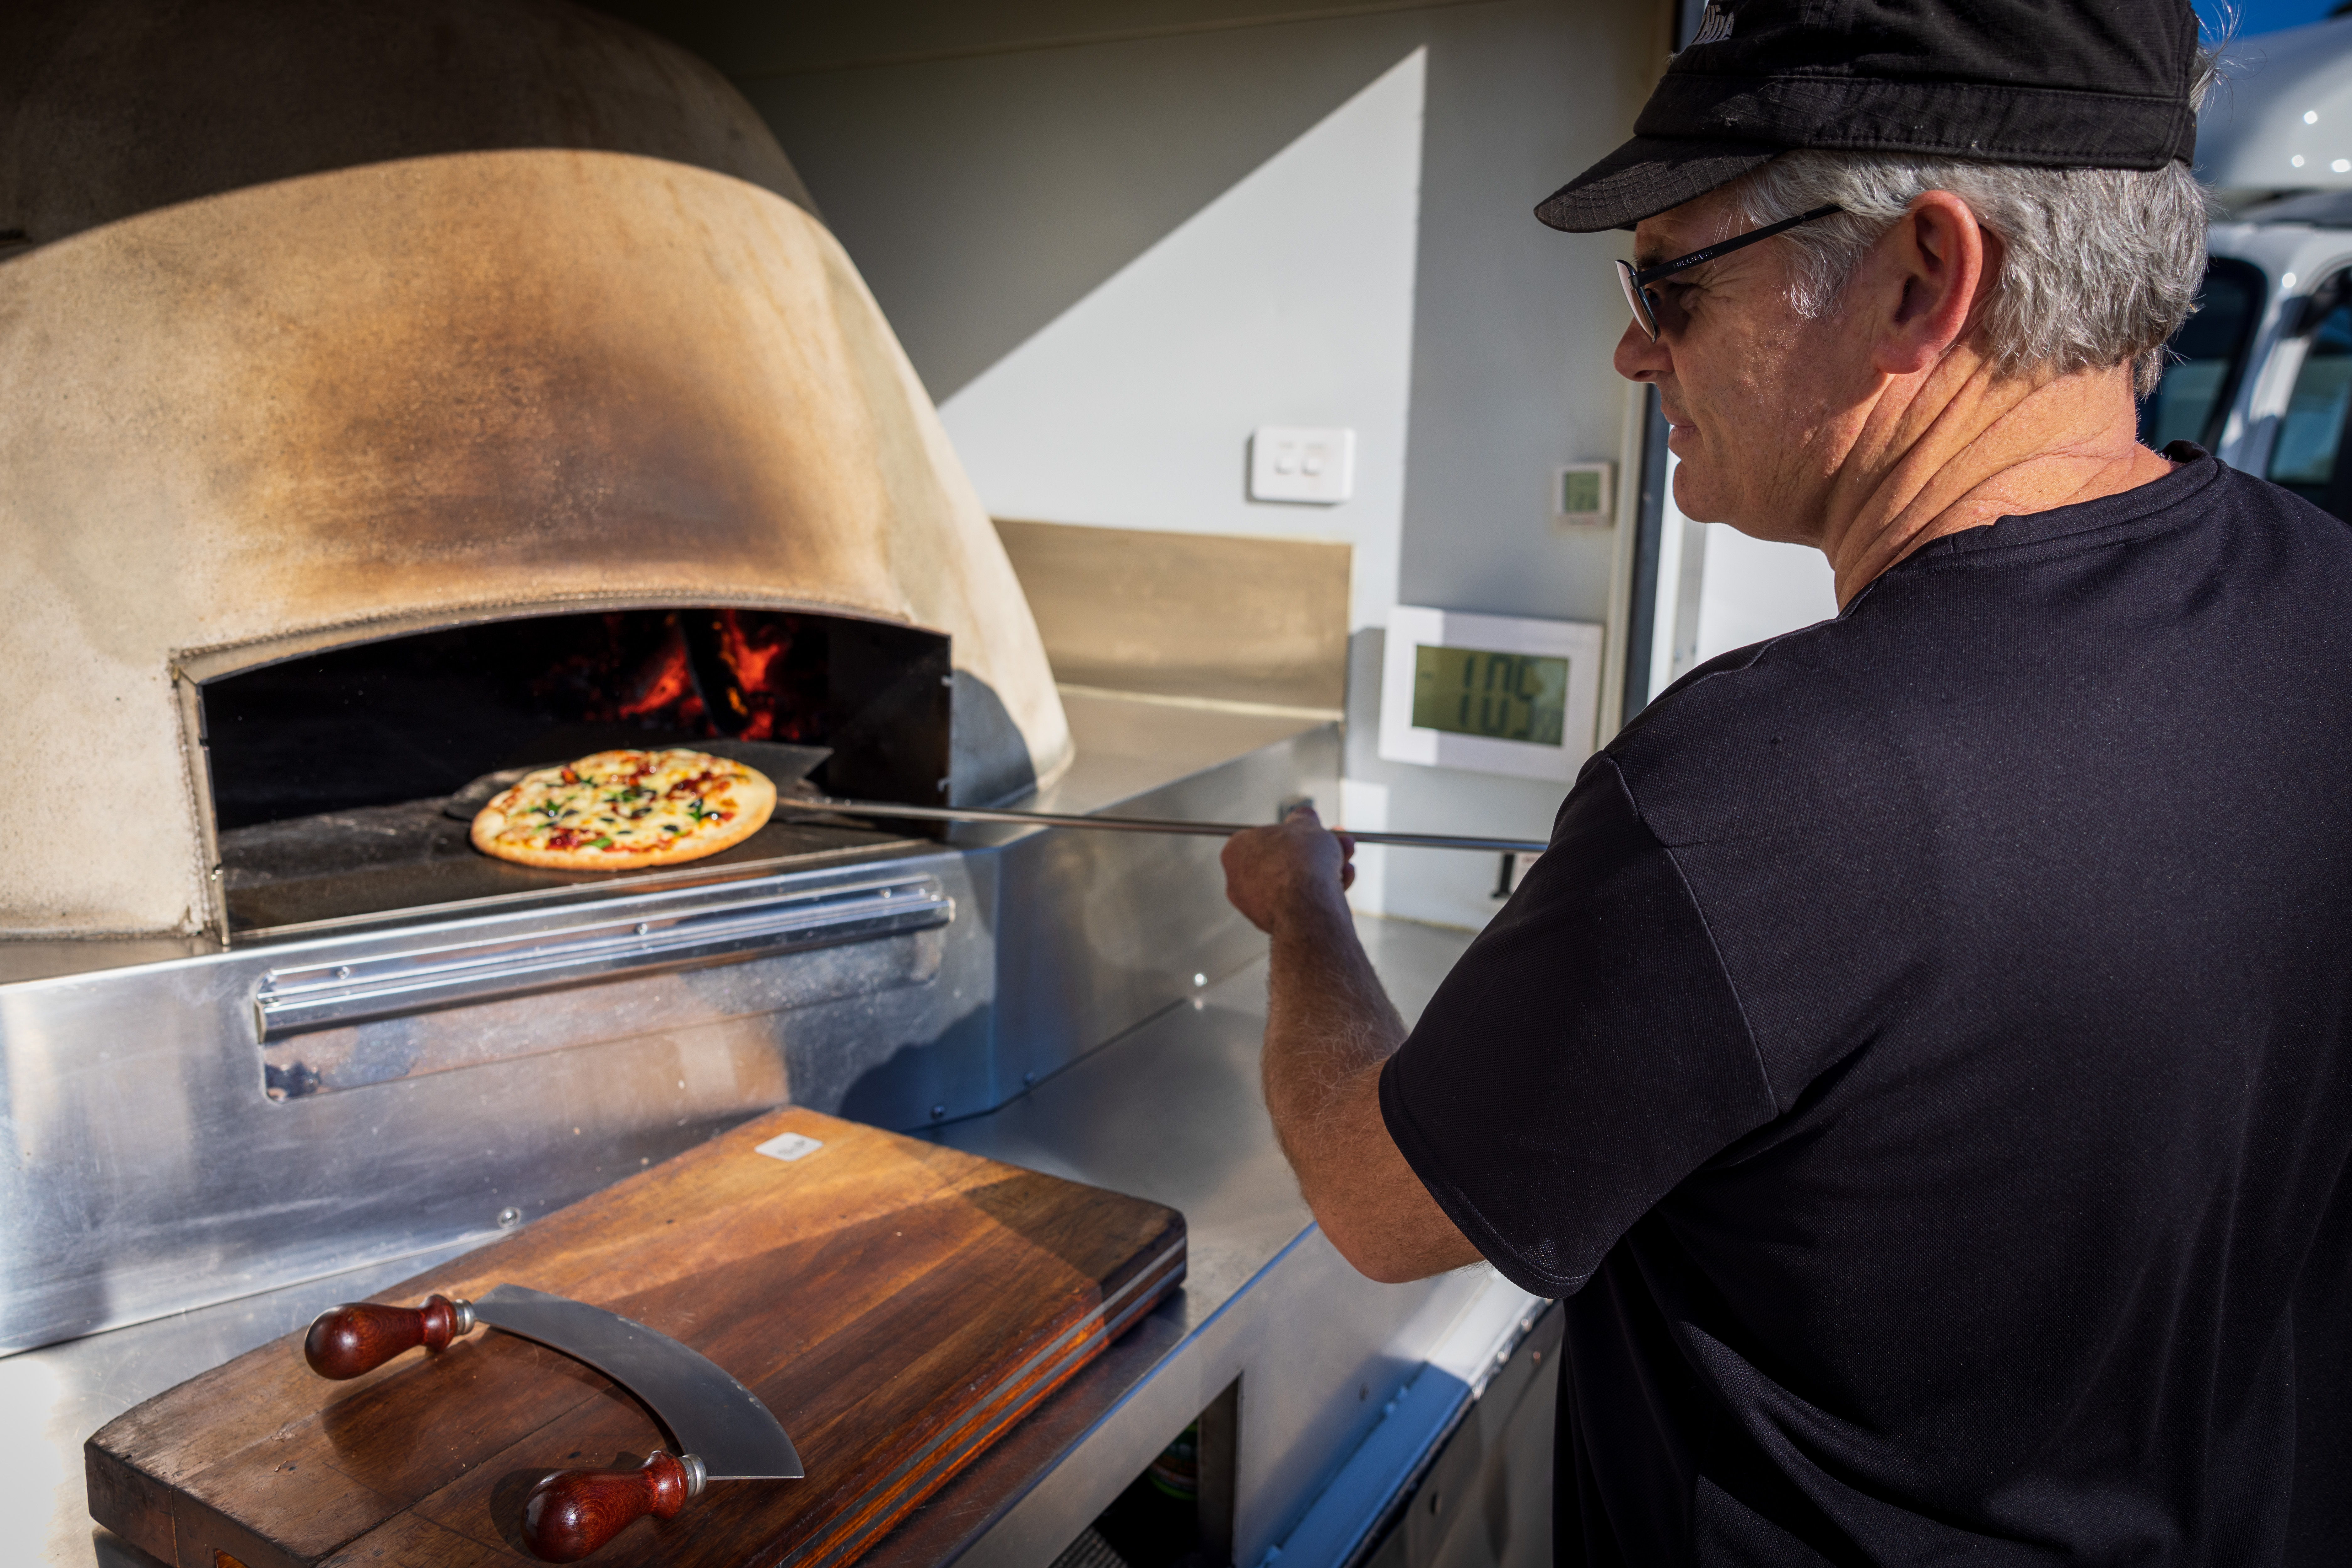 The set-up includes woodfired pizza ovens in both trucks